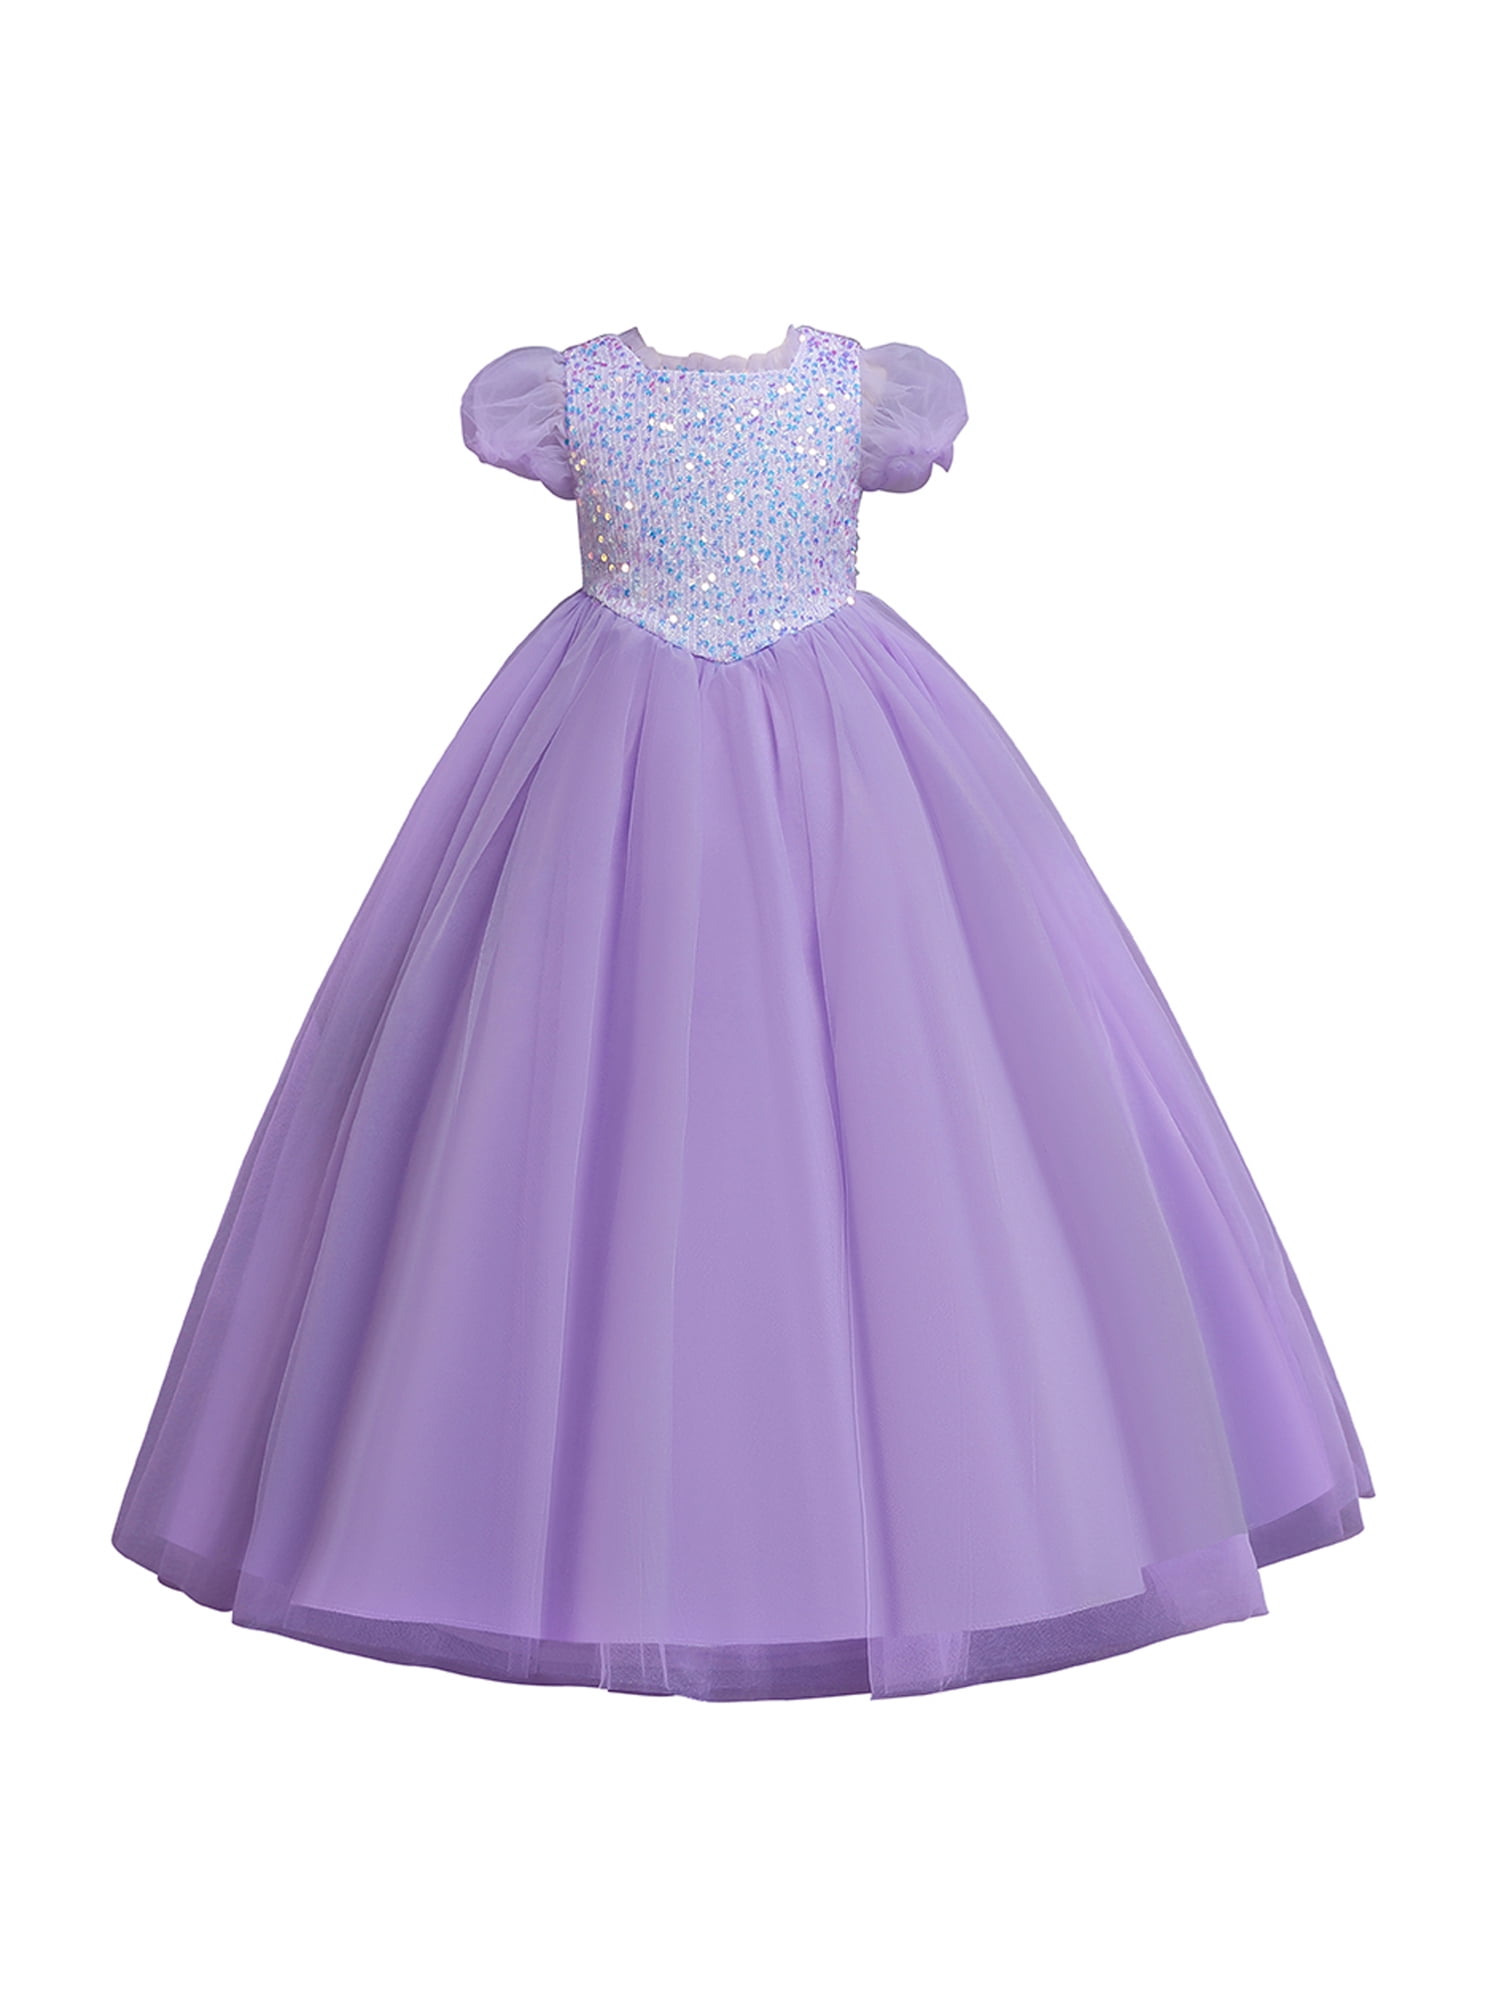 National Pageant Dress Shell  sizes 6mos to 7/8 Girls 